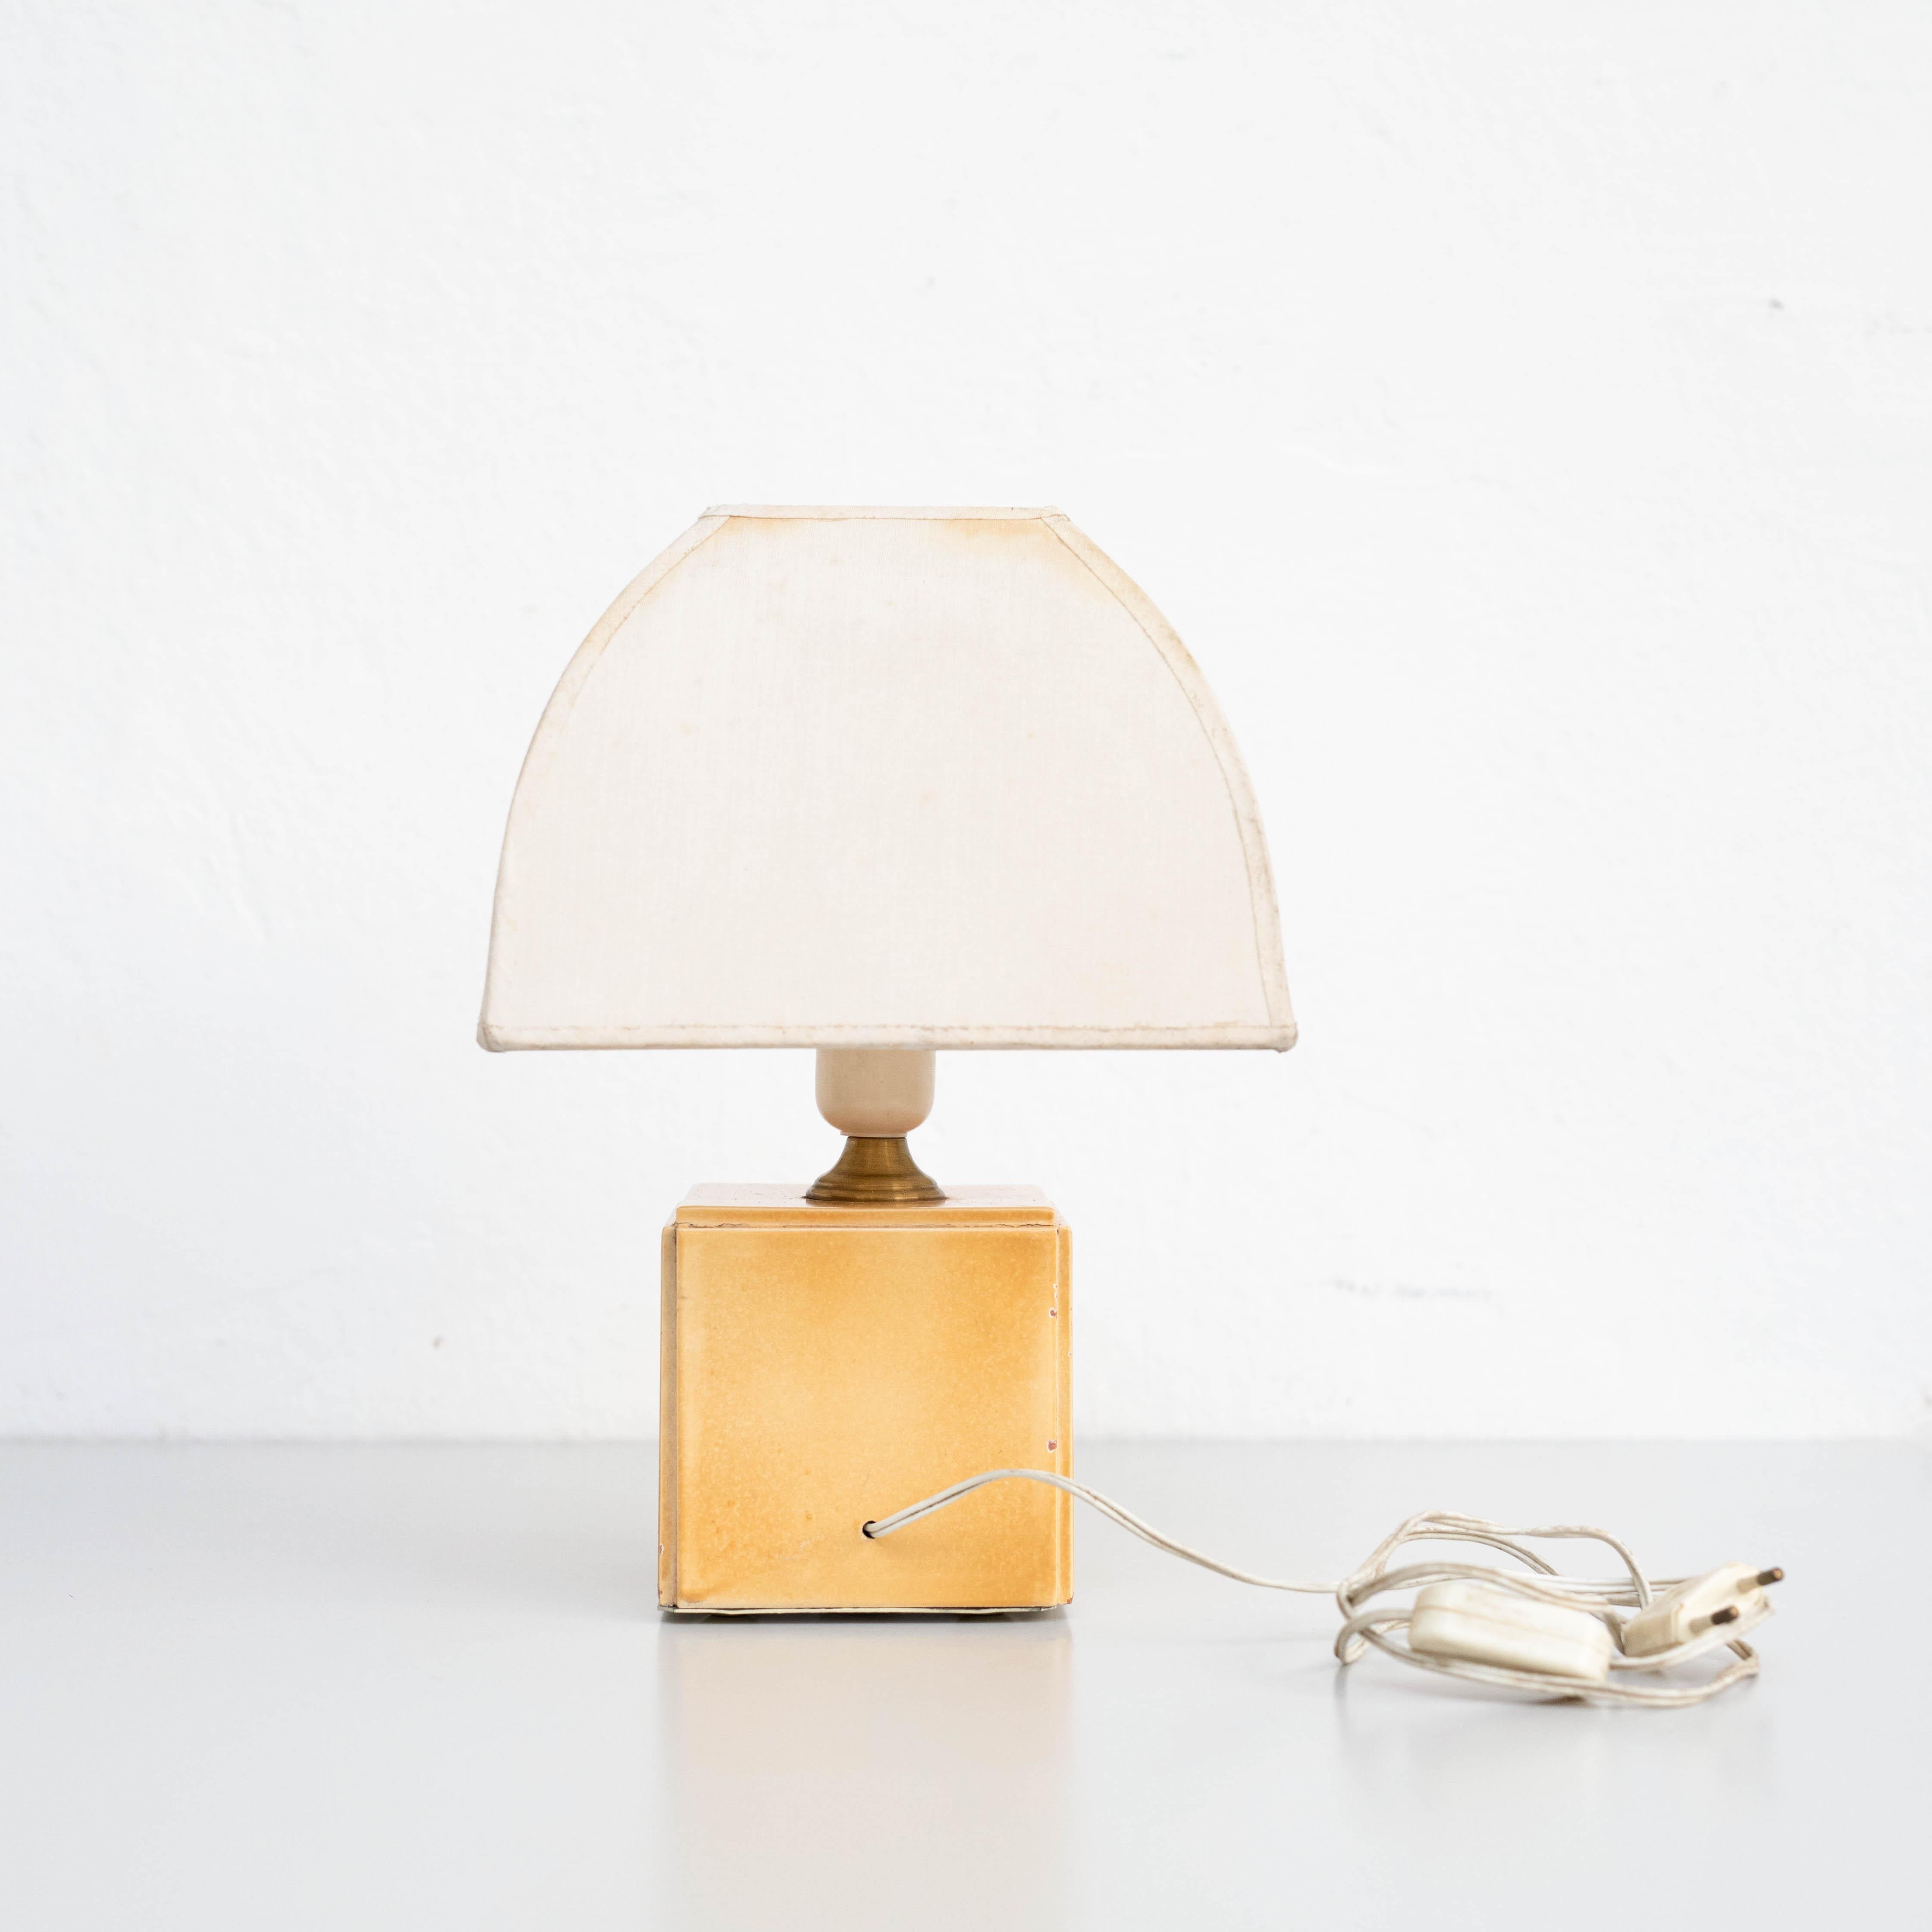 Table lamp, ceramic, Circa 1970.

In original condition, wear consistent with age and use, preserving a beautiful patina.

Wired for Europe. Electrification has not been tested.